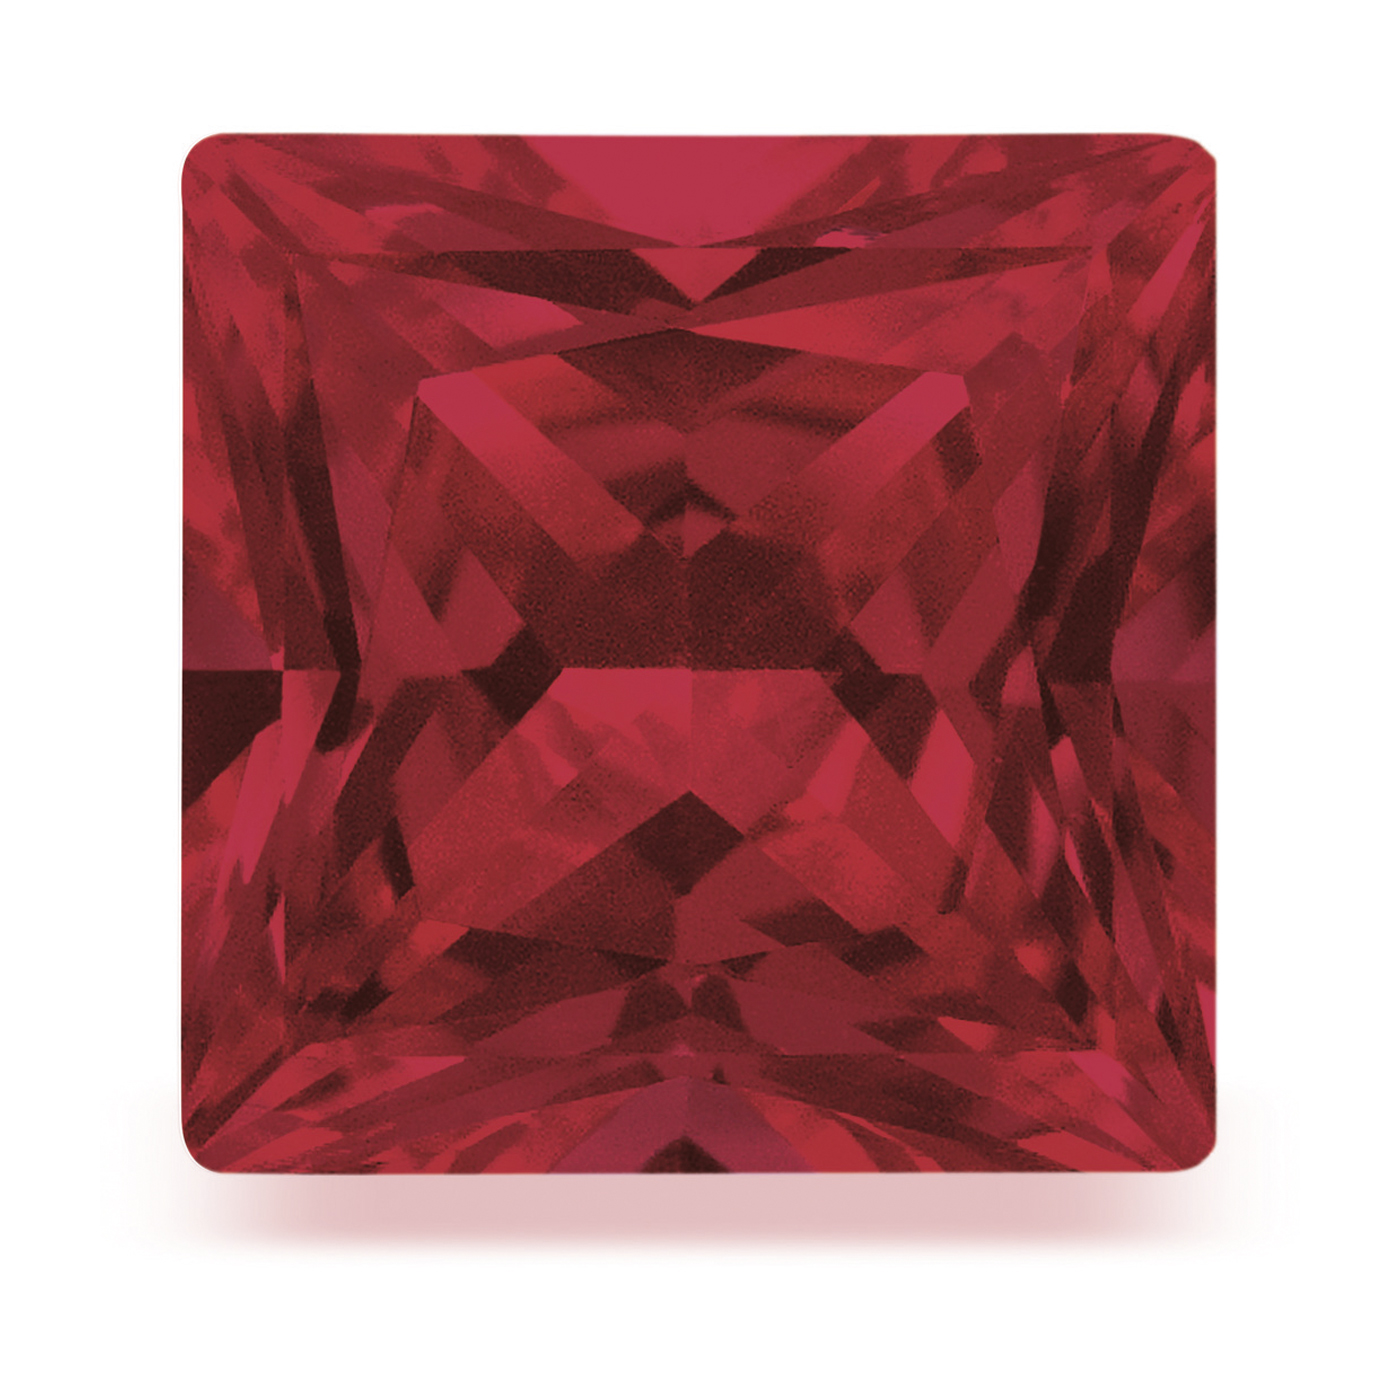 Ruby, Synthetic, Round, Dark Red, Faceted, 2.00 x 2.00 mm - 1 piece